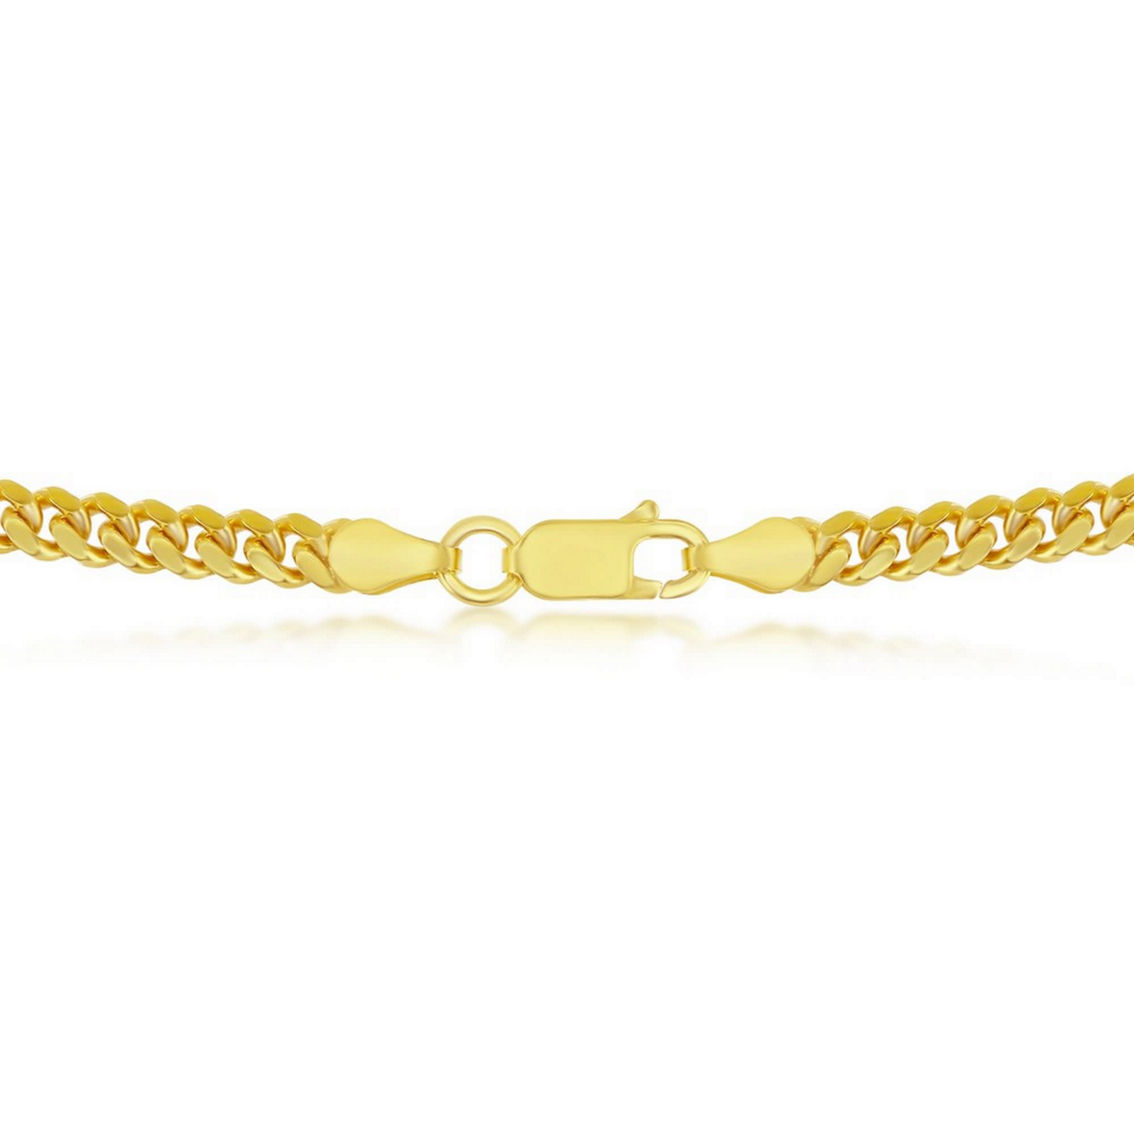 Links of Italy Sterling Silver 4mm 'Solid' Miami Cuban Chain - Gold Plated - Image 2 of 3